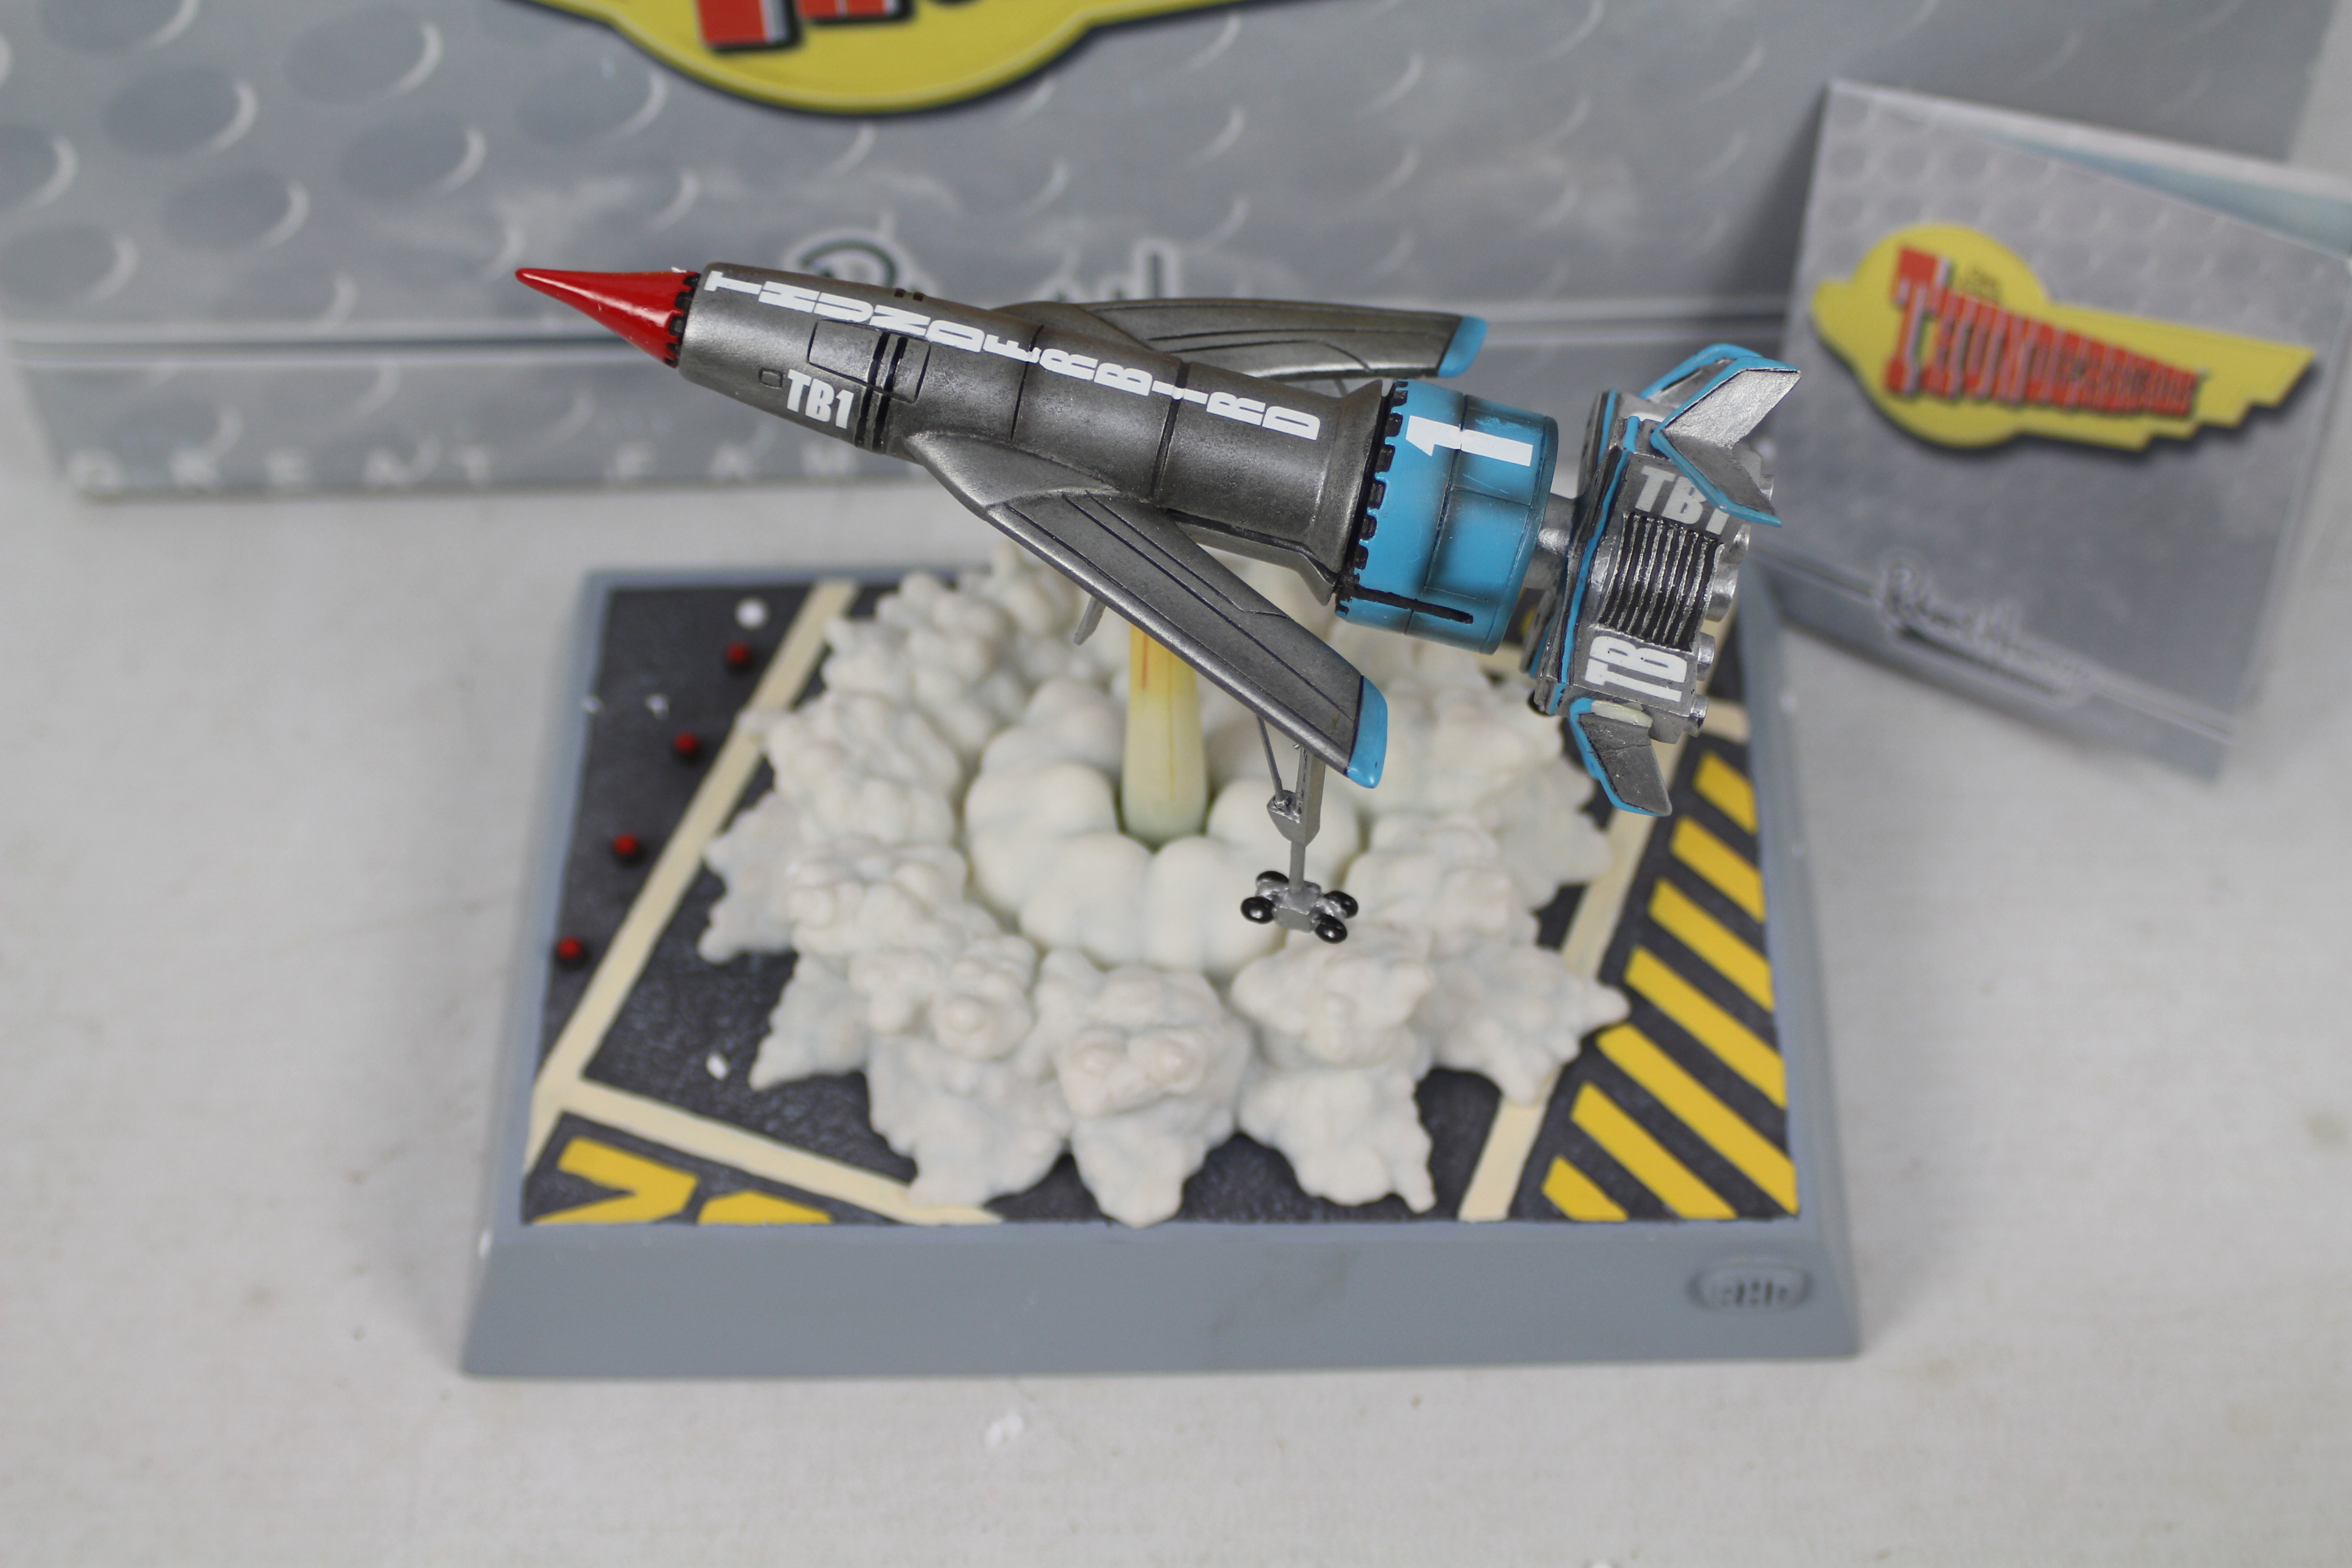 Thunderbirds - A limited edition Robert Harrop model of Thunderbird 1 from the Gerry Anderson show, - Image 2 of 3